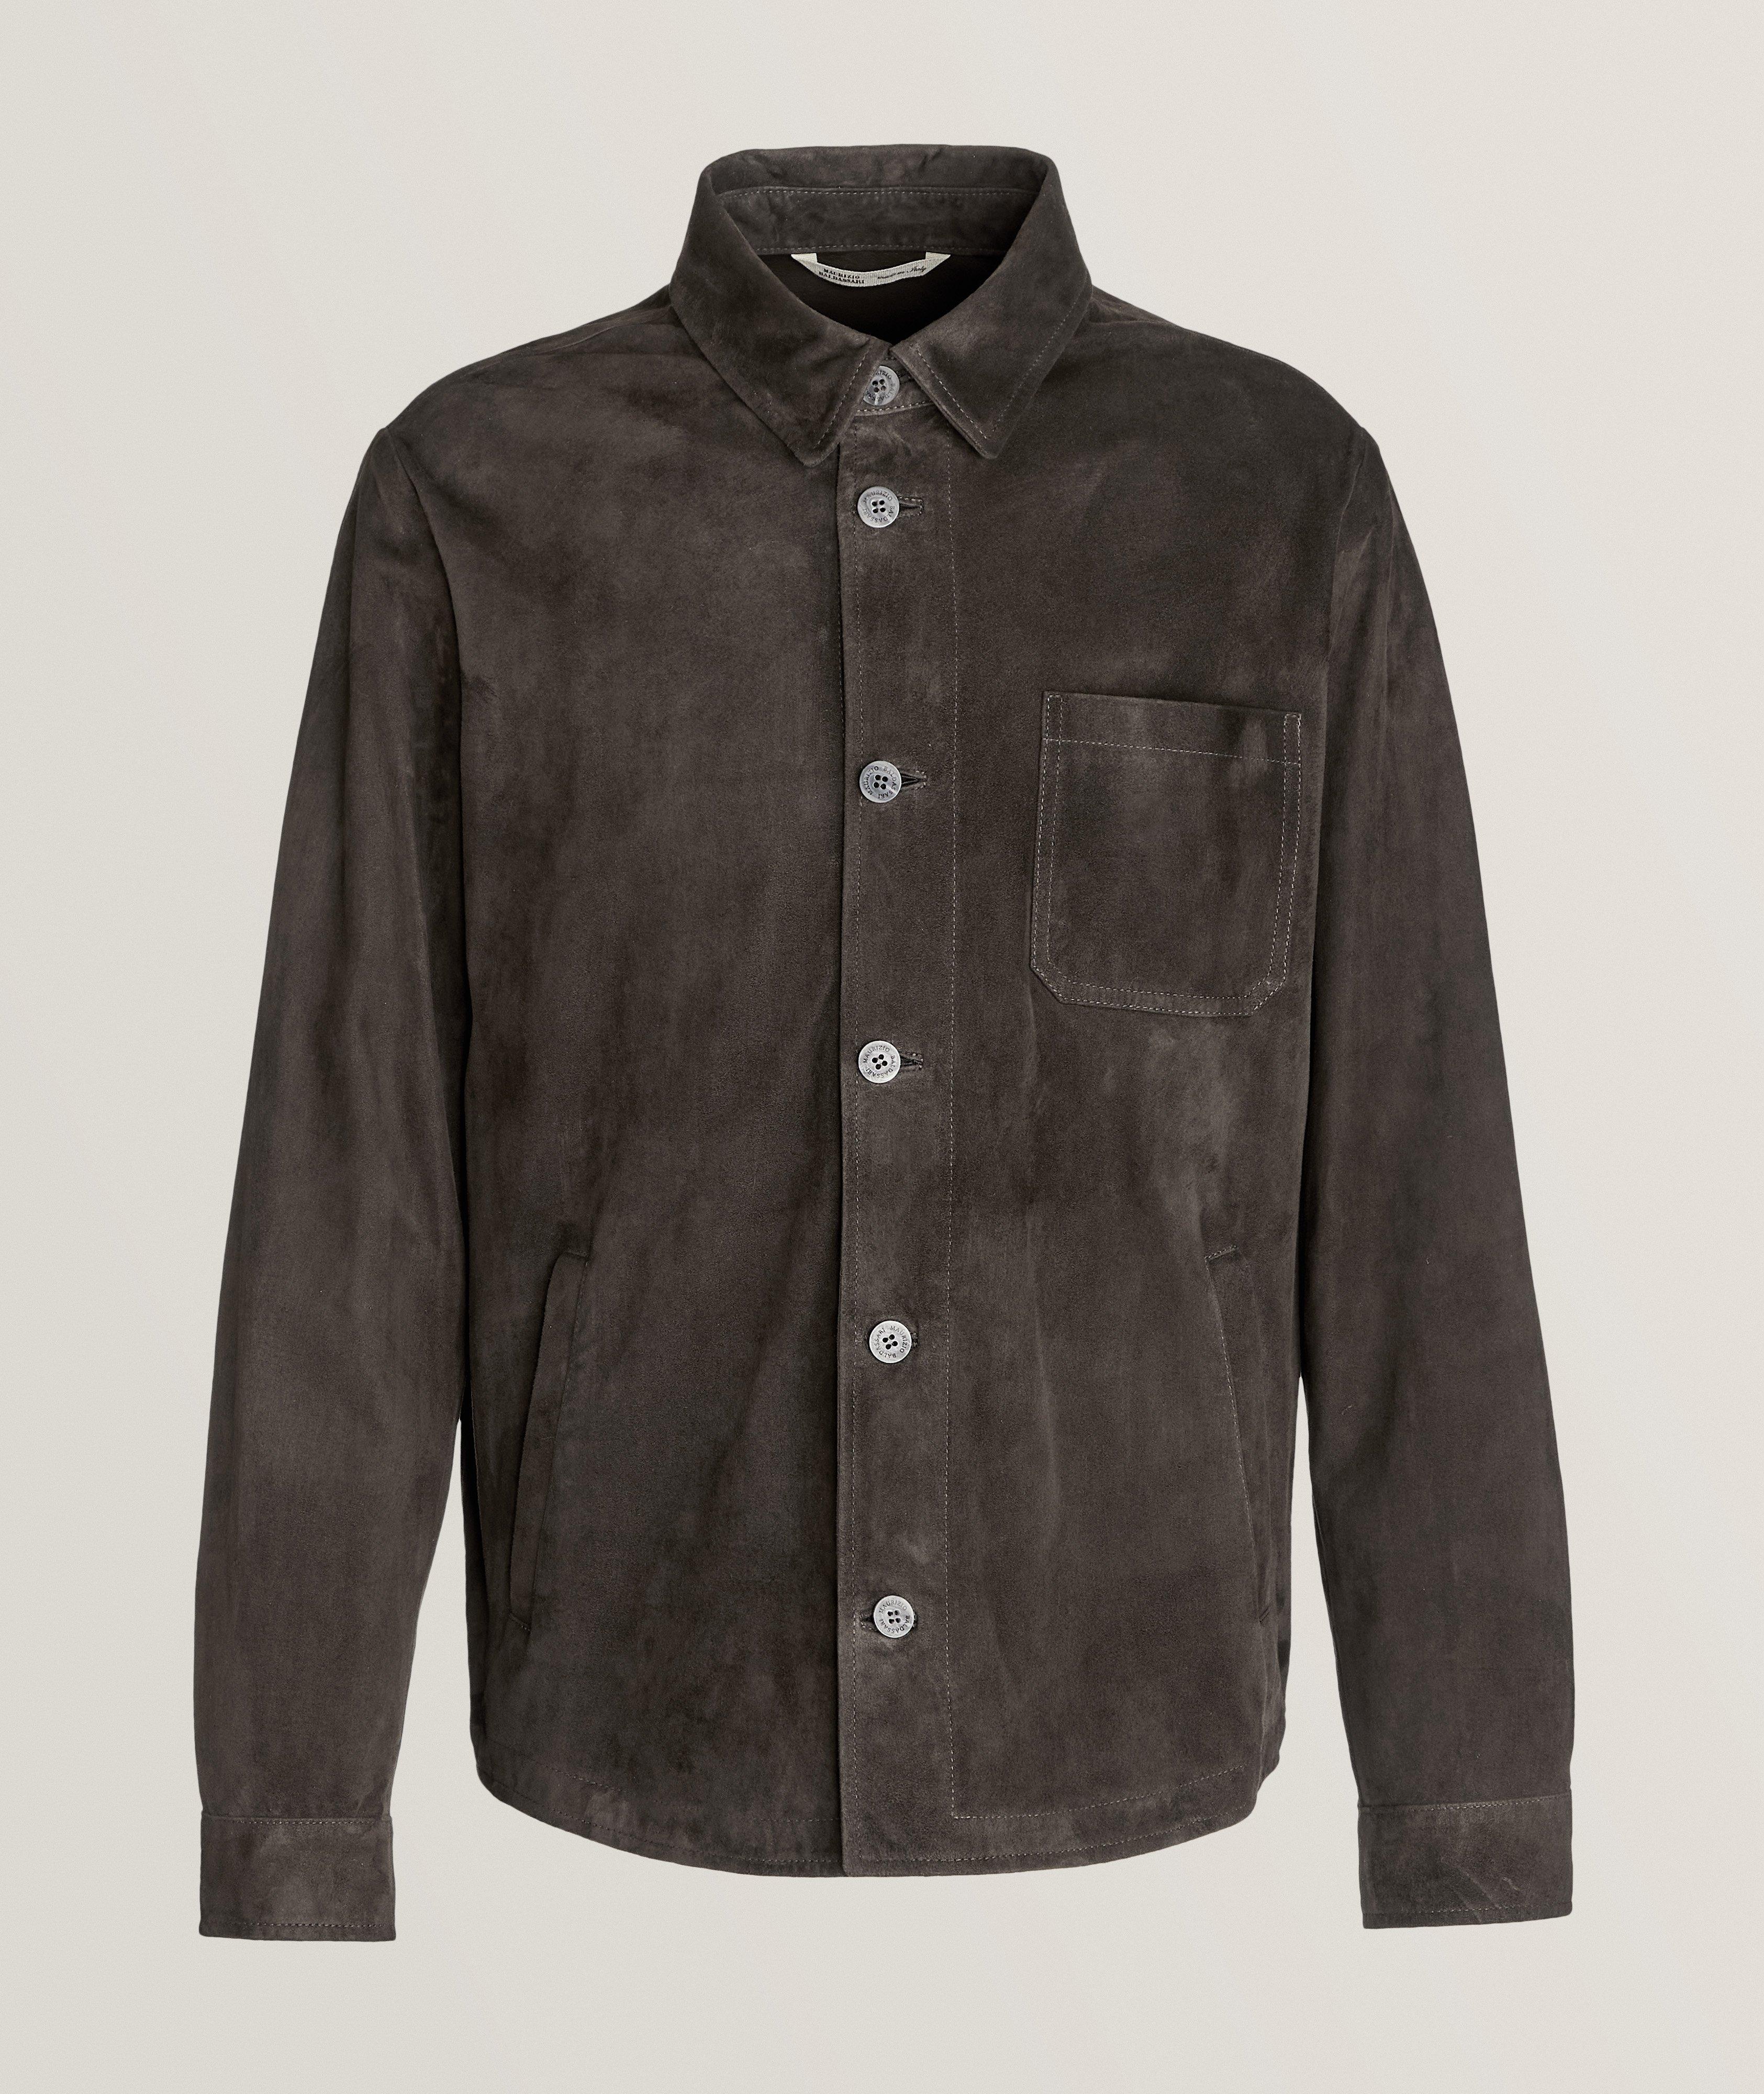 Brera Suede-Leather Overshirt image 0